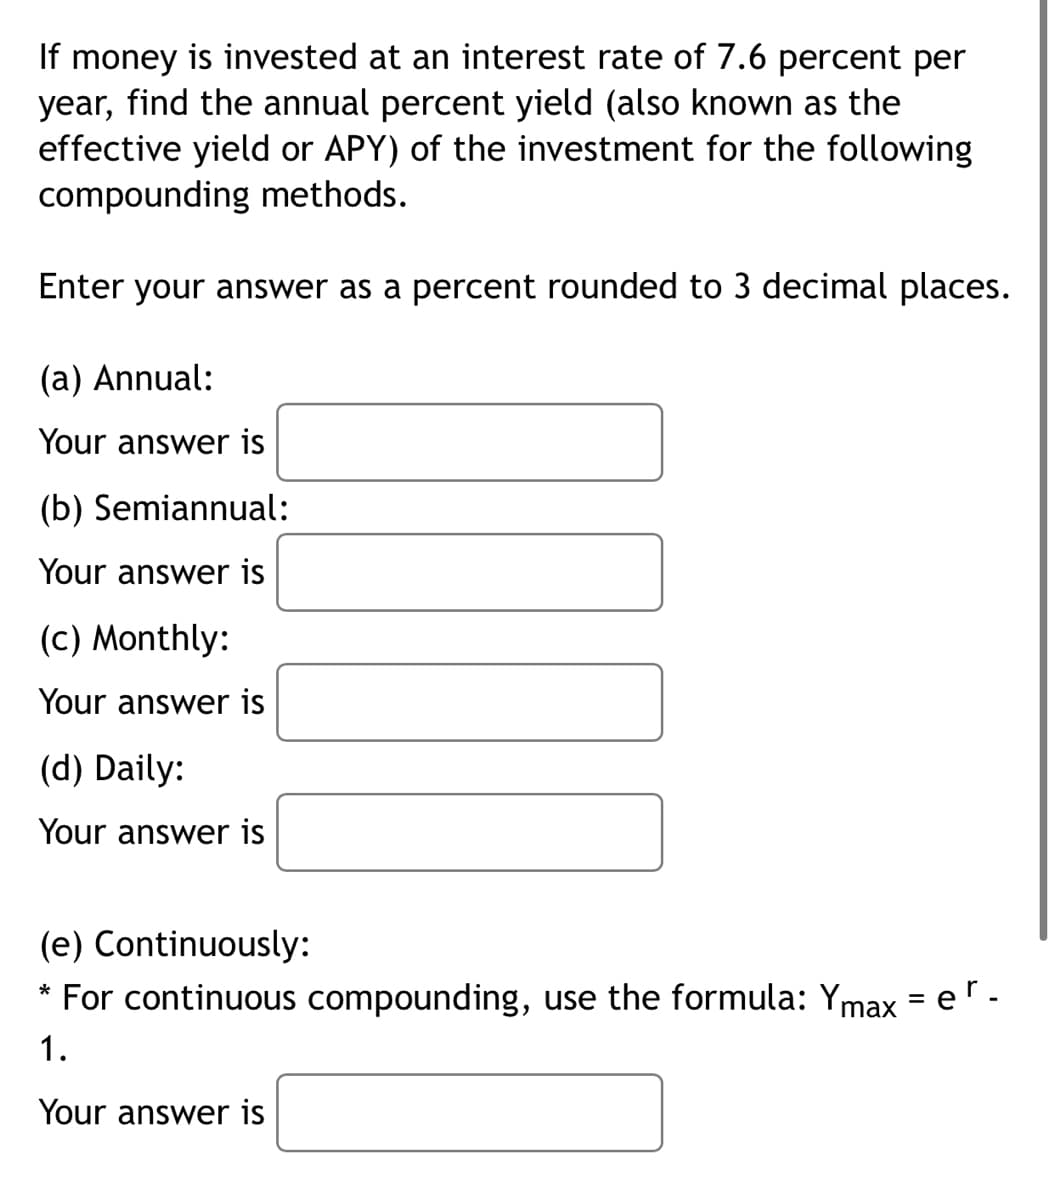 If money is invested at an interest rate of 7.6 percent per
year, find the annual percent yield (also known as the
effective yield or APY) of the investment for the following
compounding methods.
Enter your answer as a percent rounded to 3 decimal places.
(a) Annual:
Your answer is
(b) Semiannual:
Your answer is
(c) Monthly:
Your answer is
(d) Daily:
Your answer is
(e) Continuously:
* For continuous compounding, use the formula: Ymax = er-
1.
Your answer is
